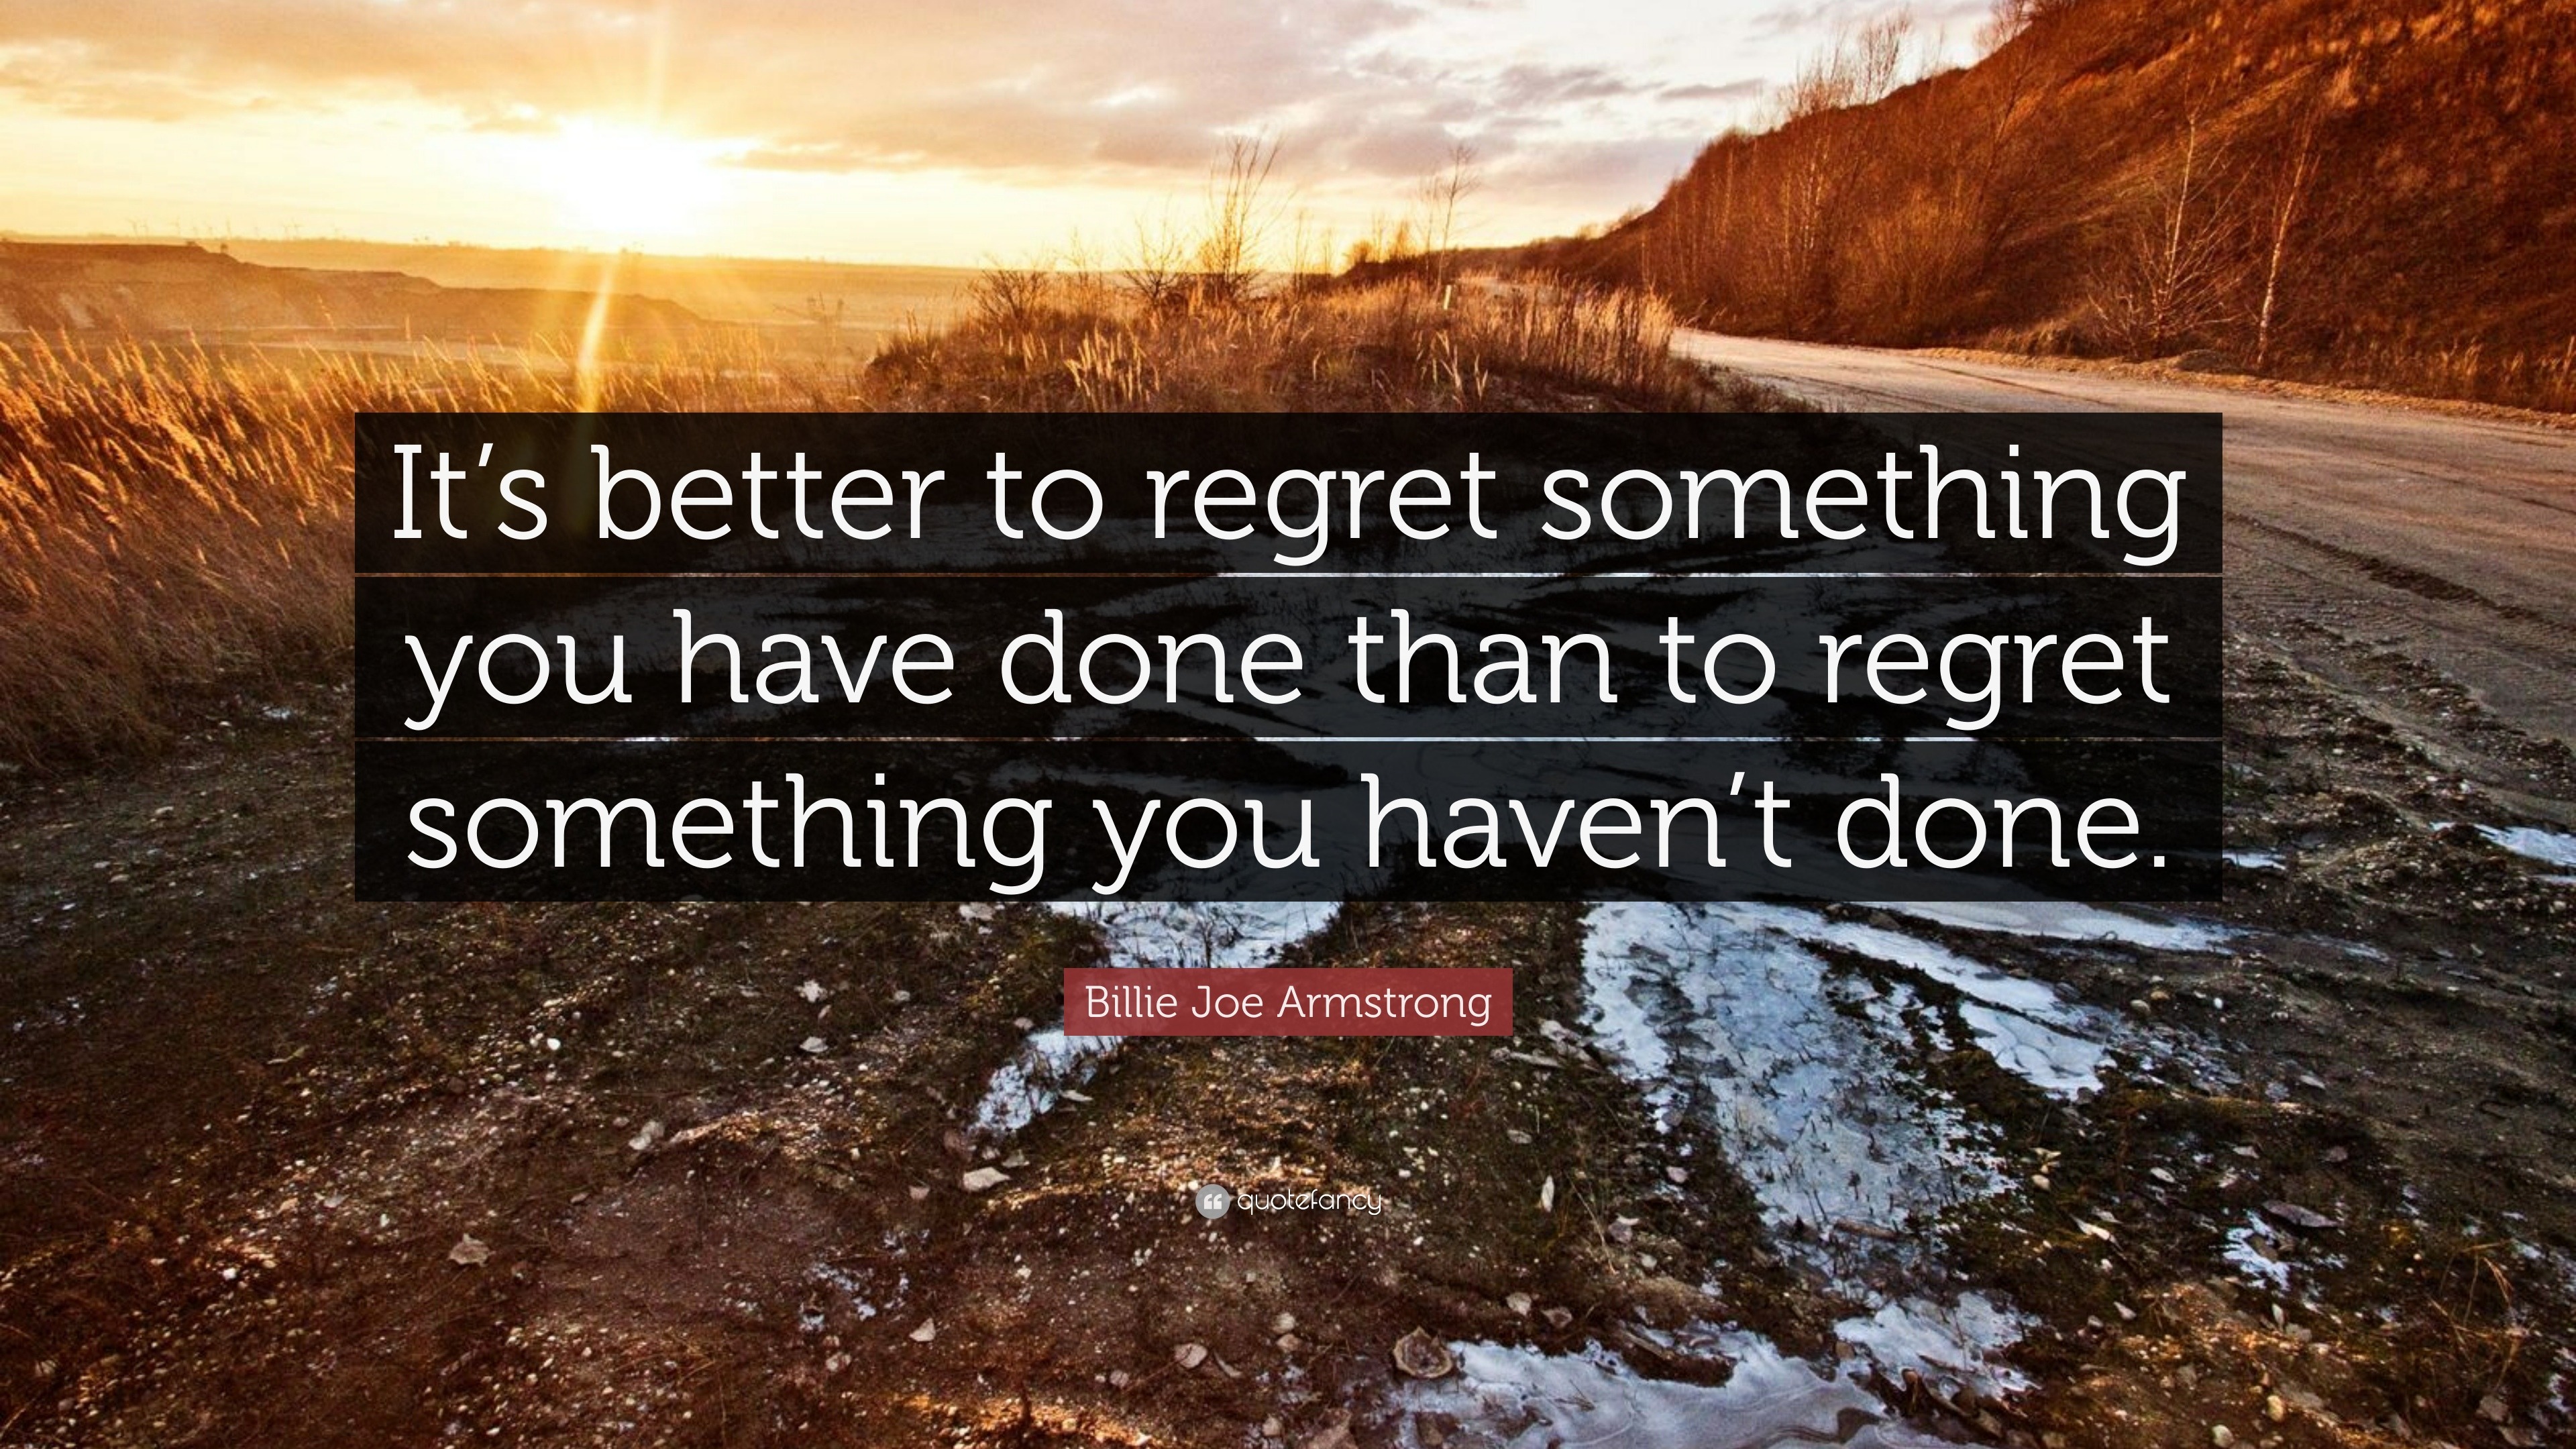 Billie Joe Armstrong Quote “It’s better to regret